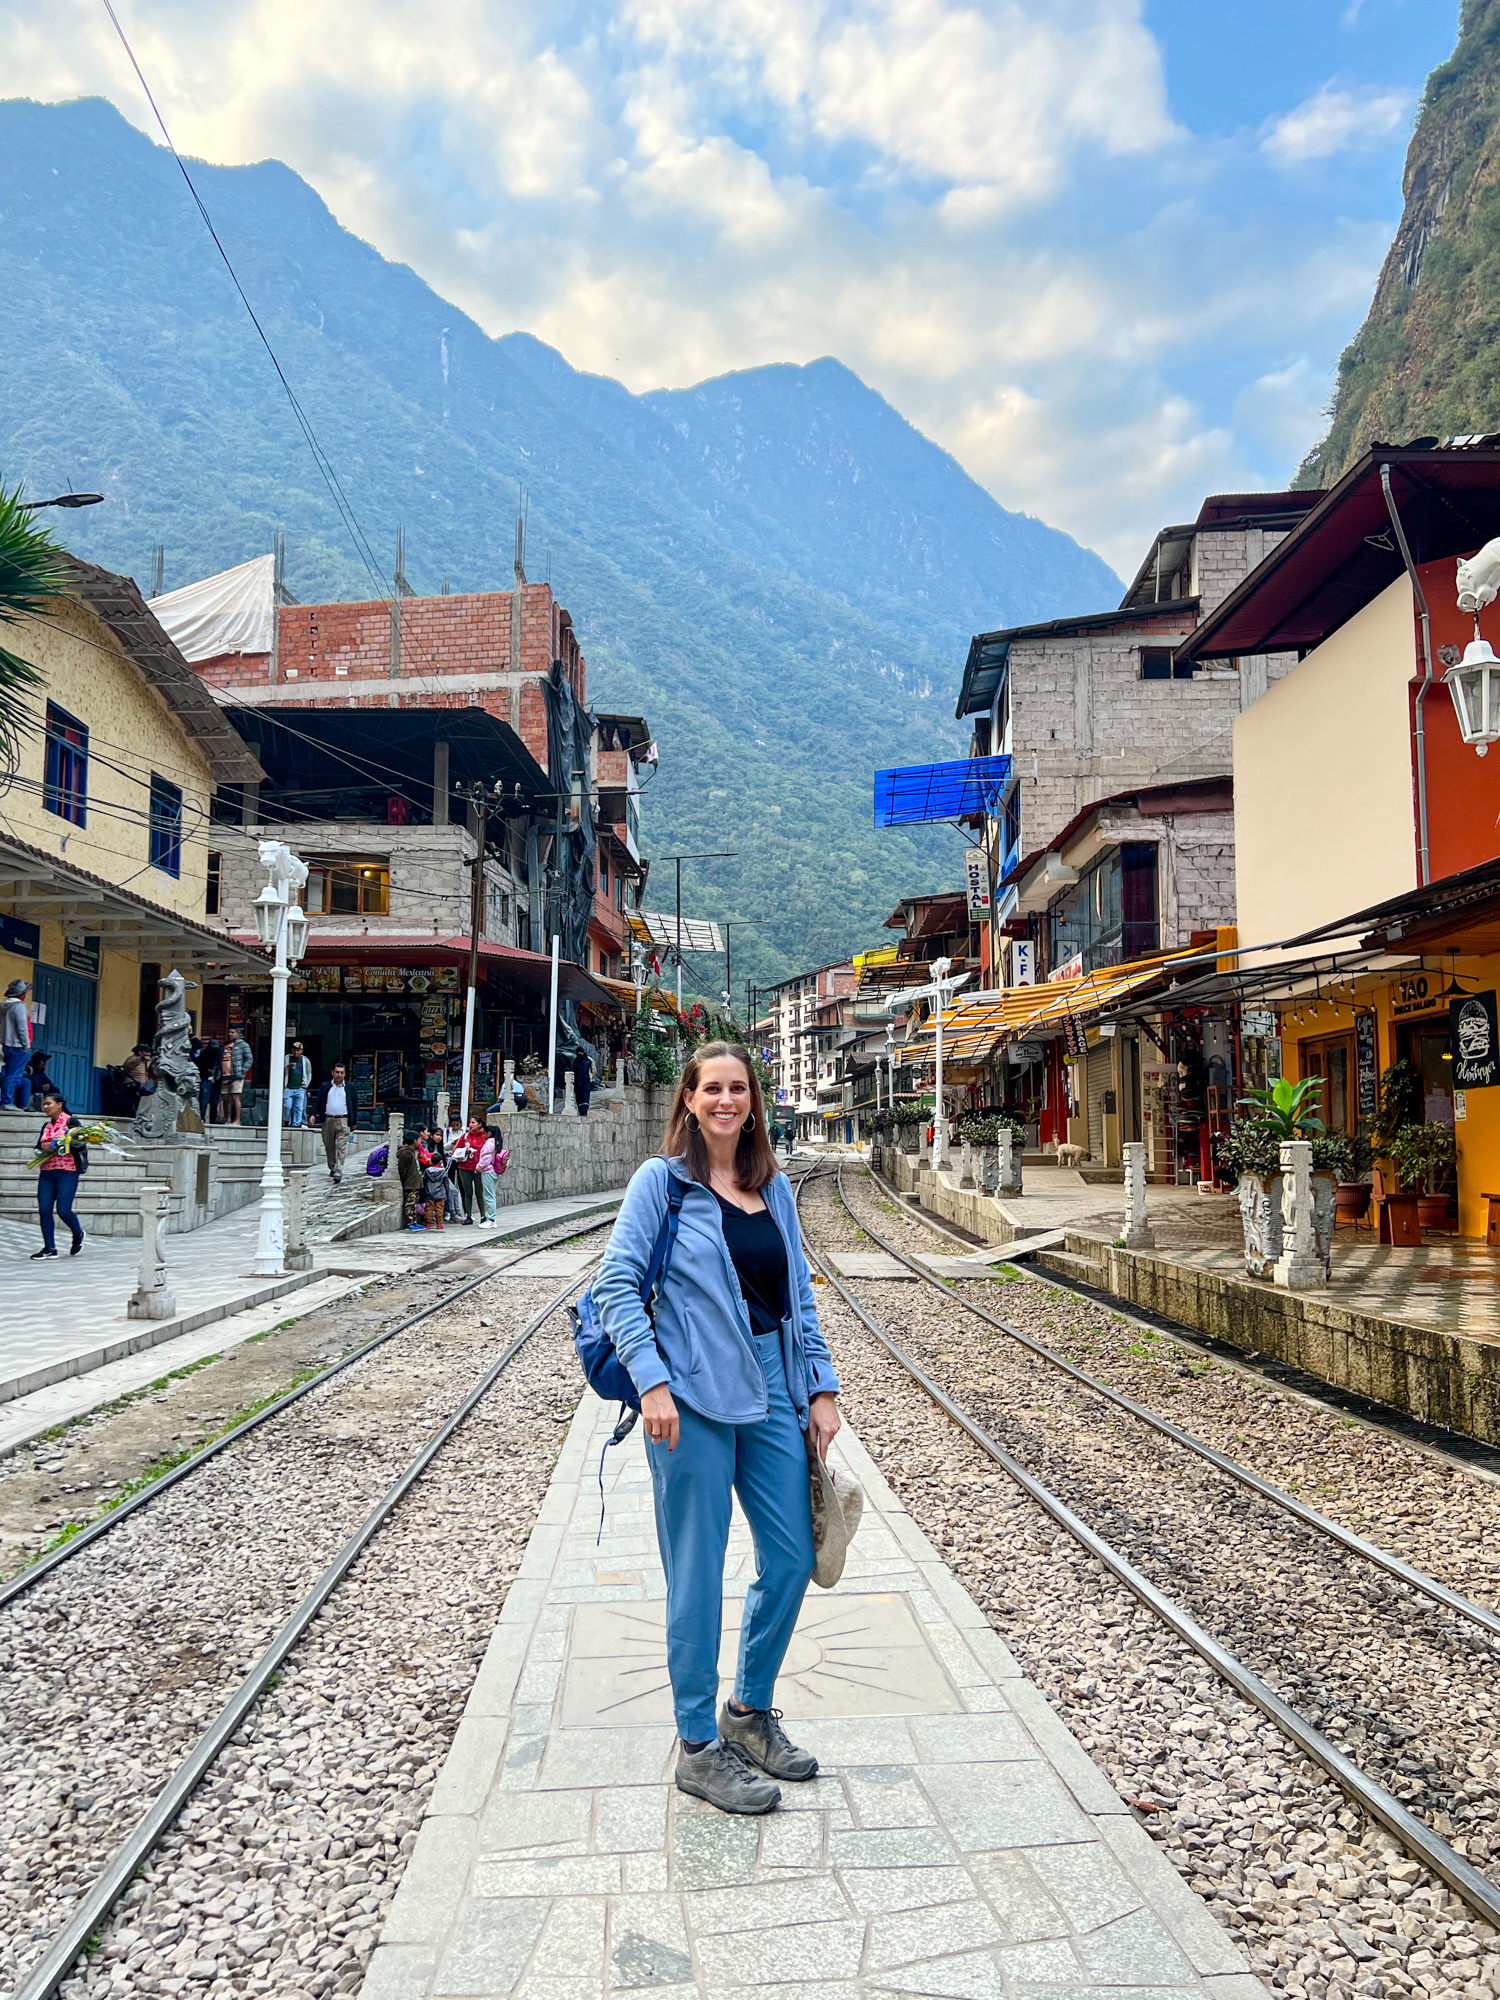 Kel in Aguas Calientes. If you want to get to Machu Picchu in Peru, you'll visit here too.